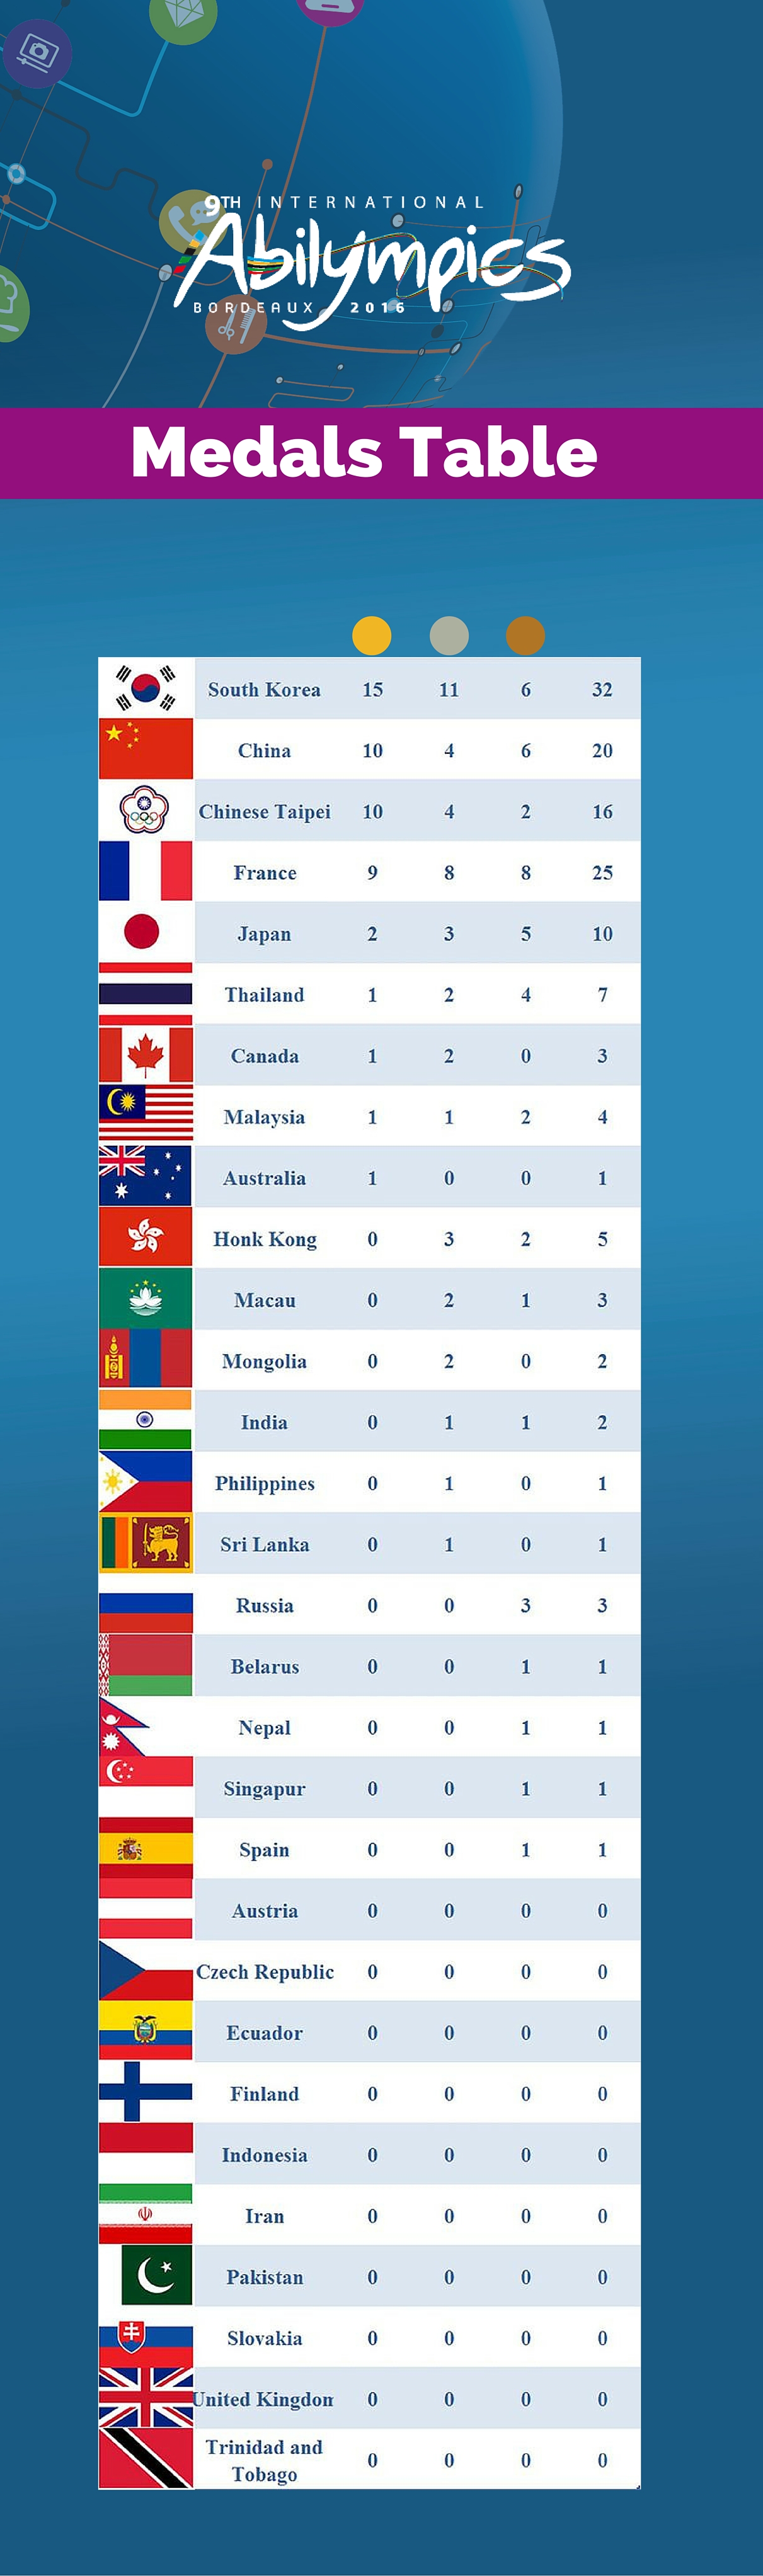 Medals-Table-Final